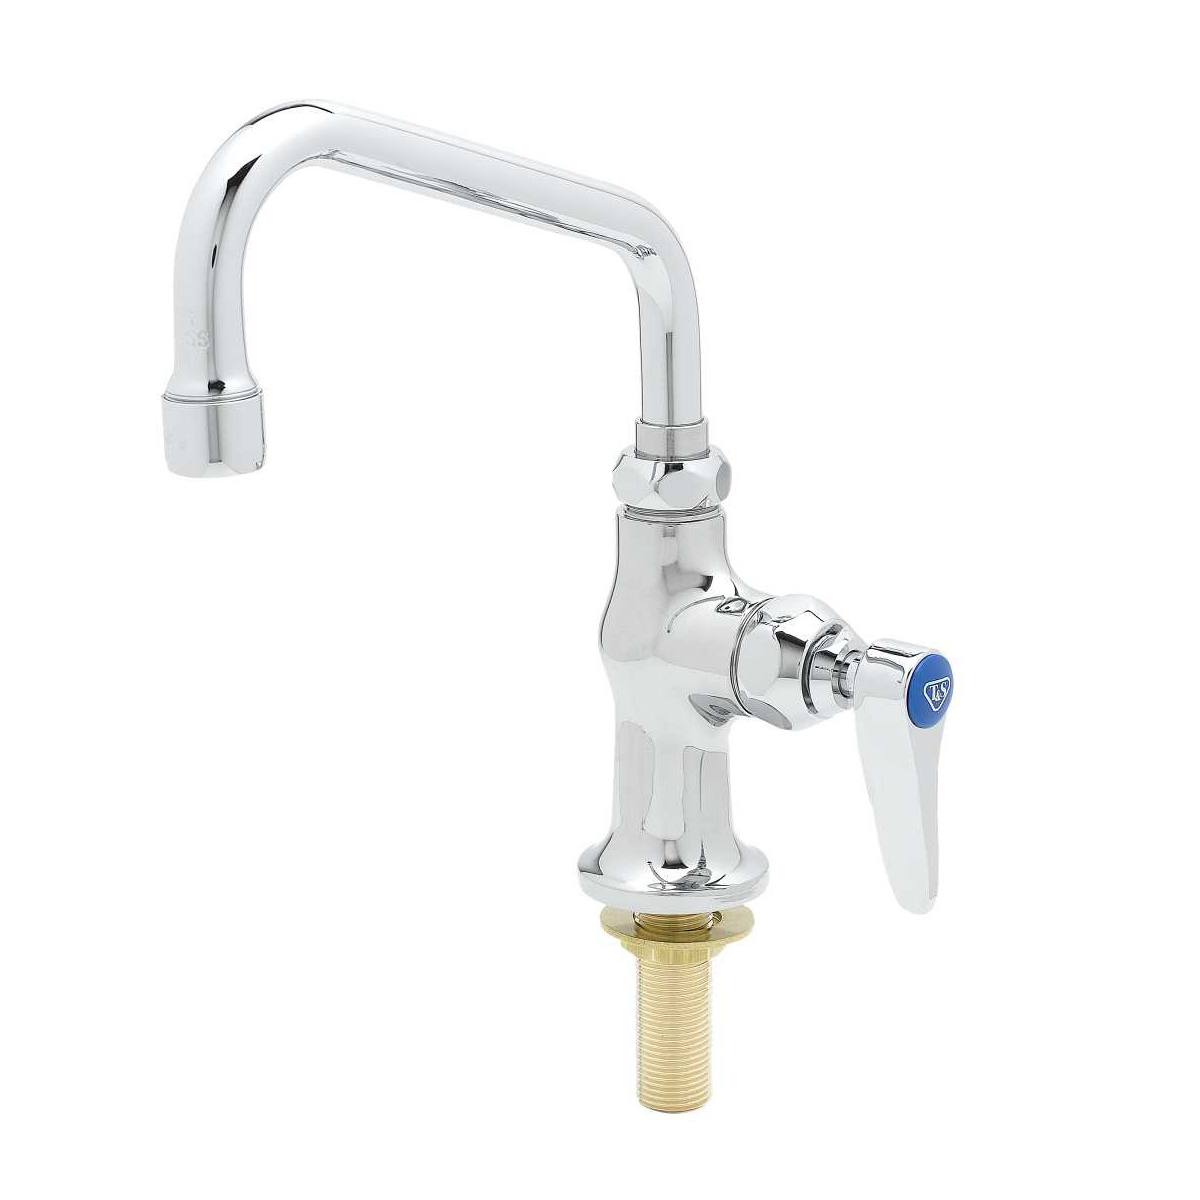 T&S Brass B-0207 Single Hole Deck Mounted Pantry Faucet With 6” Swing  Nozzle And Eterna Cartridge